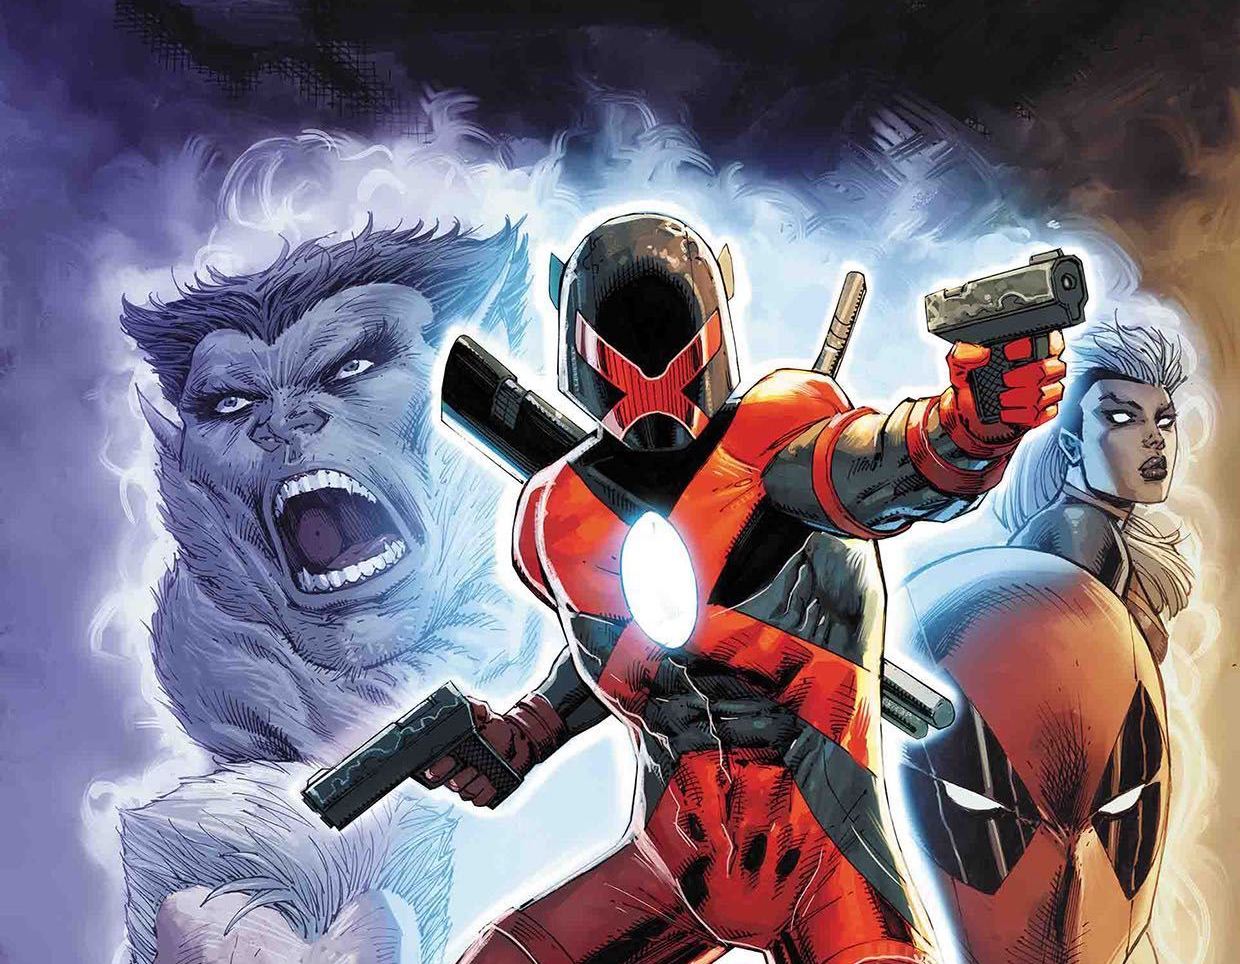 Major X #1 review: It's everything you'd expect in a Rob Liefeld book